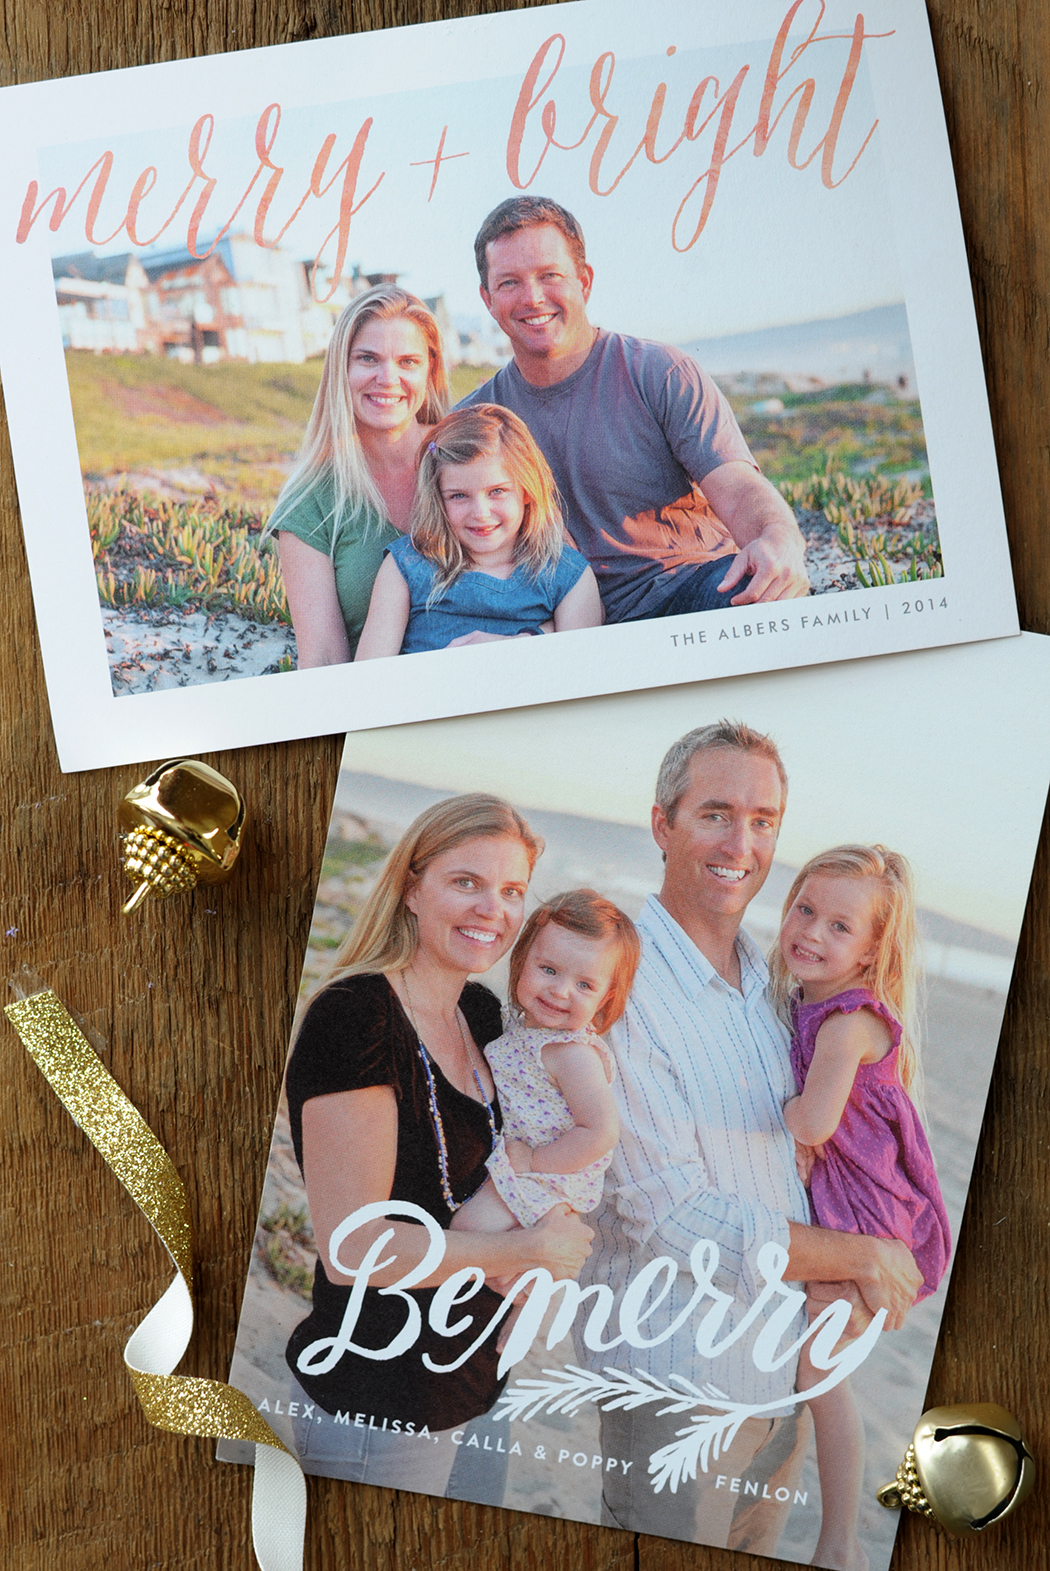 minted's gorgeous holiday cards